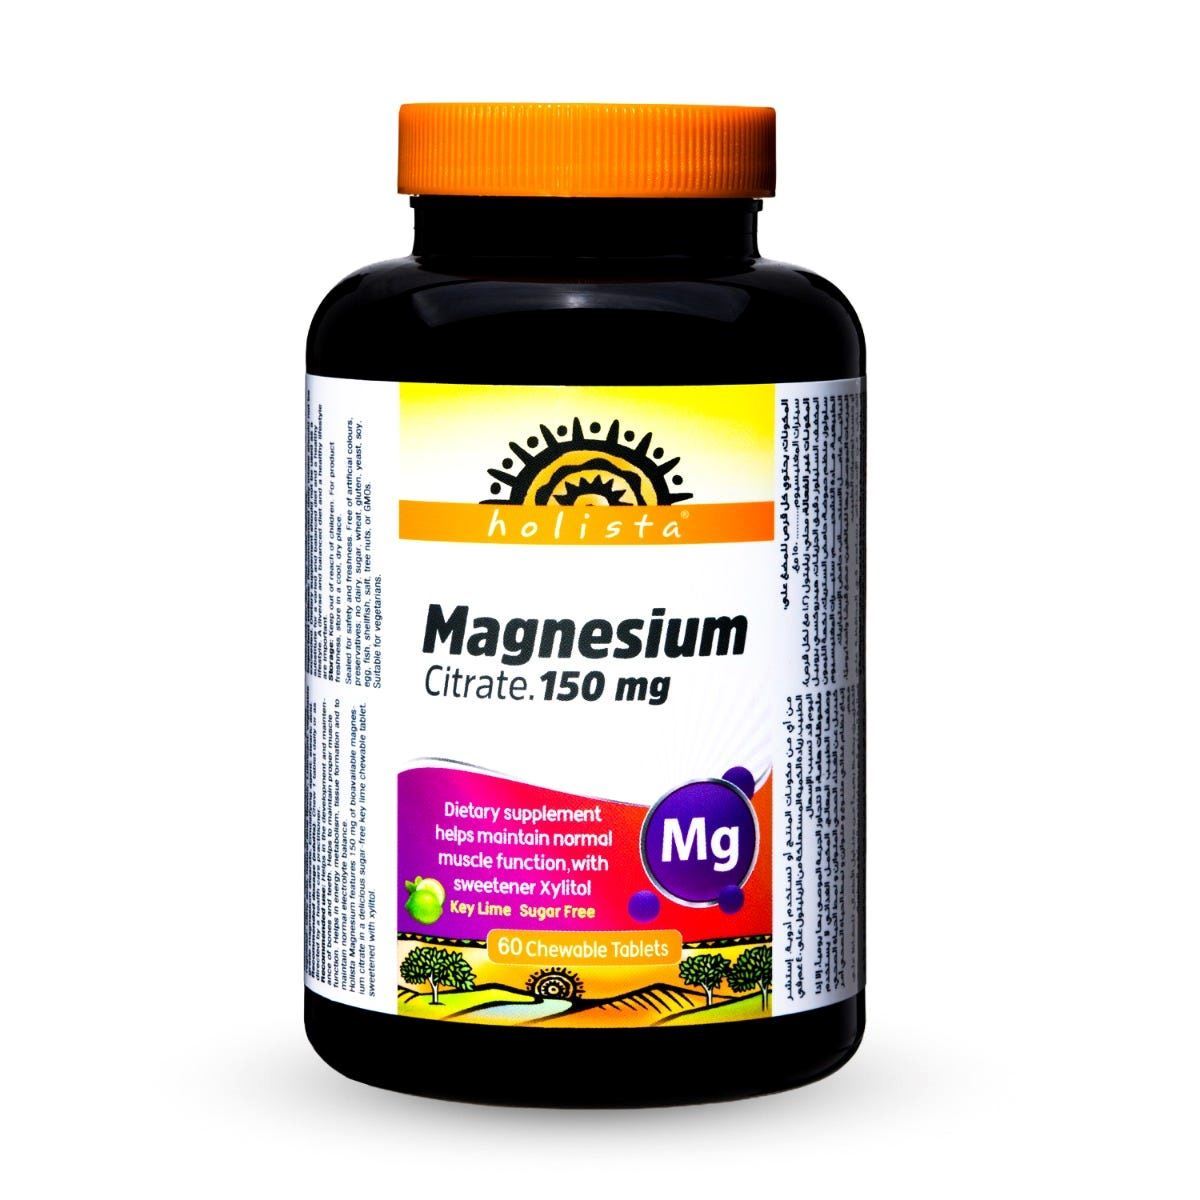 HOLISTA MAGNESIUM CITRATE 150 MG 60 CHEWABLE TABLETS